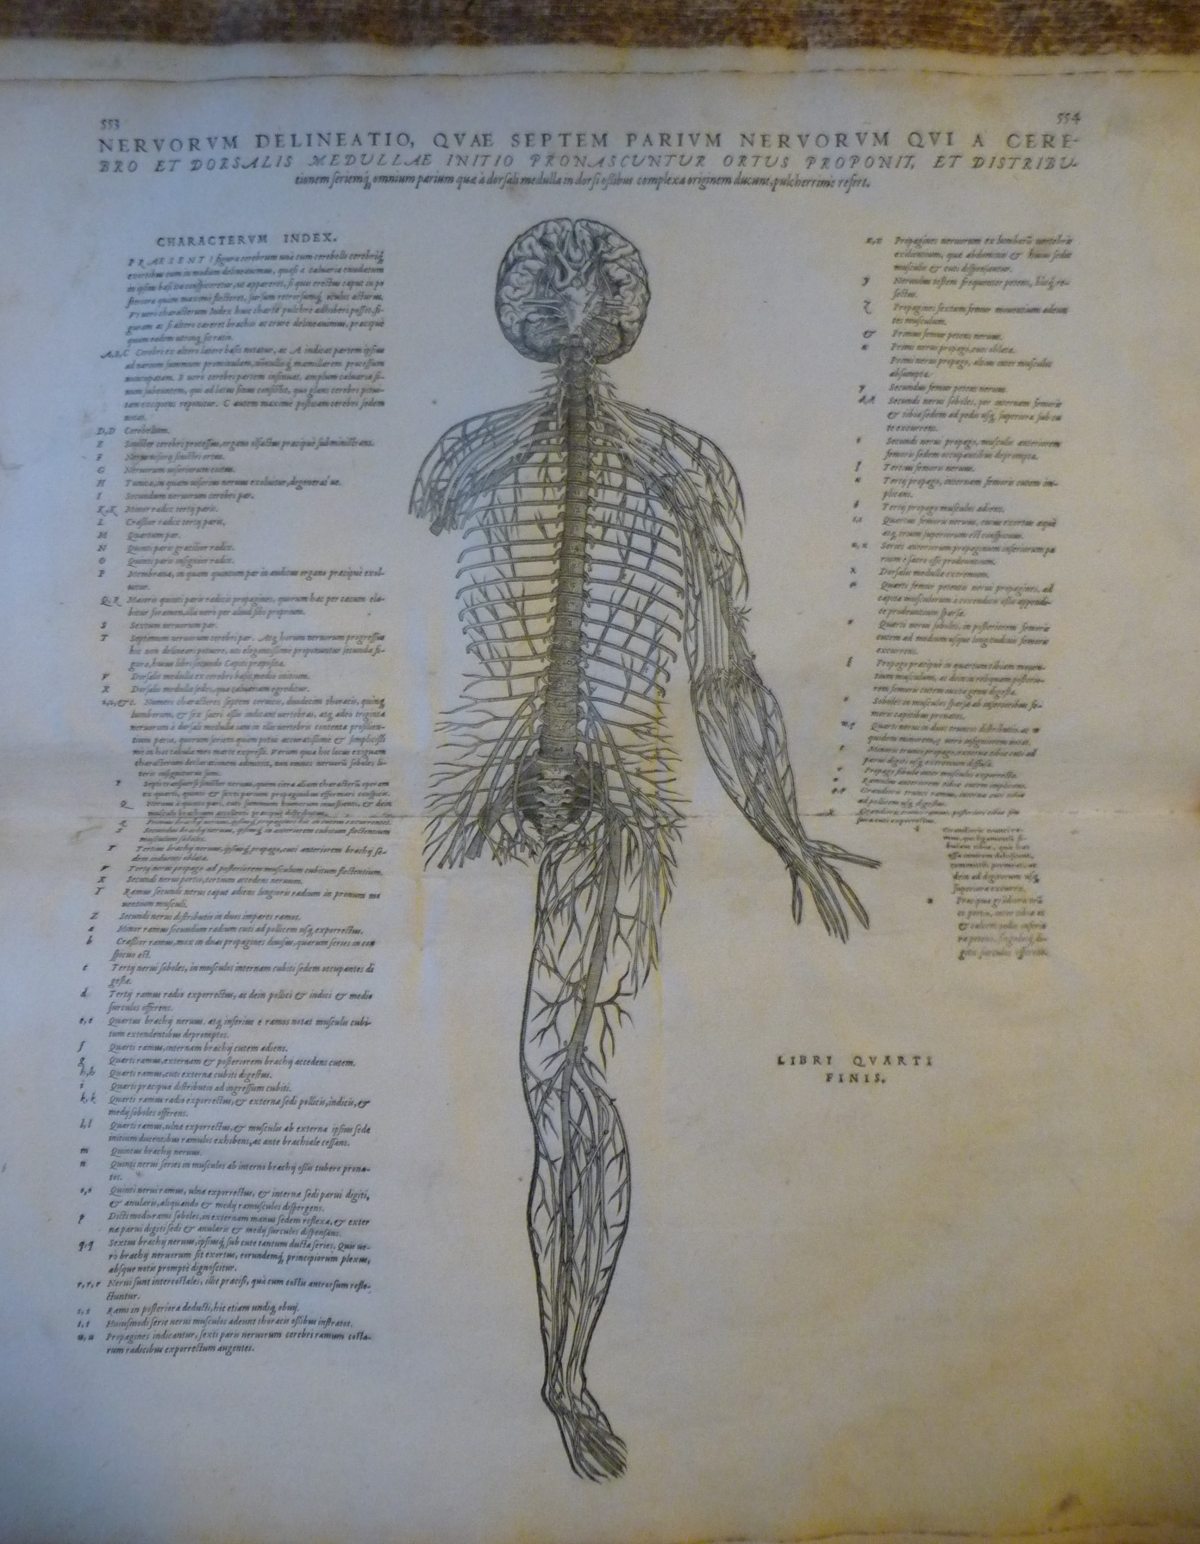 A page from 'De humani corporis fabrica' (The fabric of the human body) by Andreas Vesalius showing an illustration of the nerves in the body.